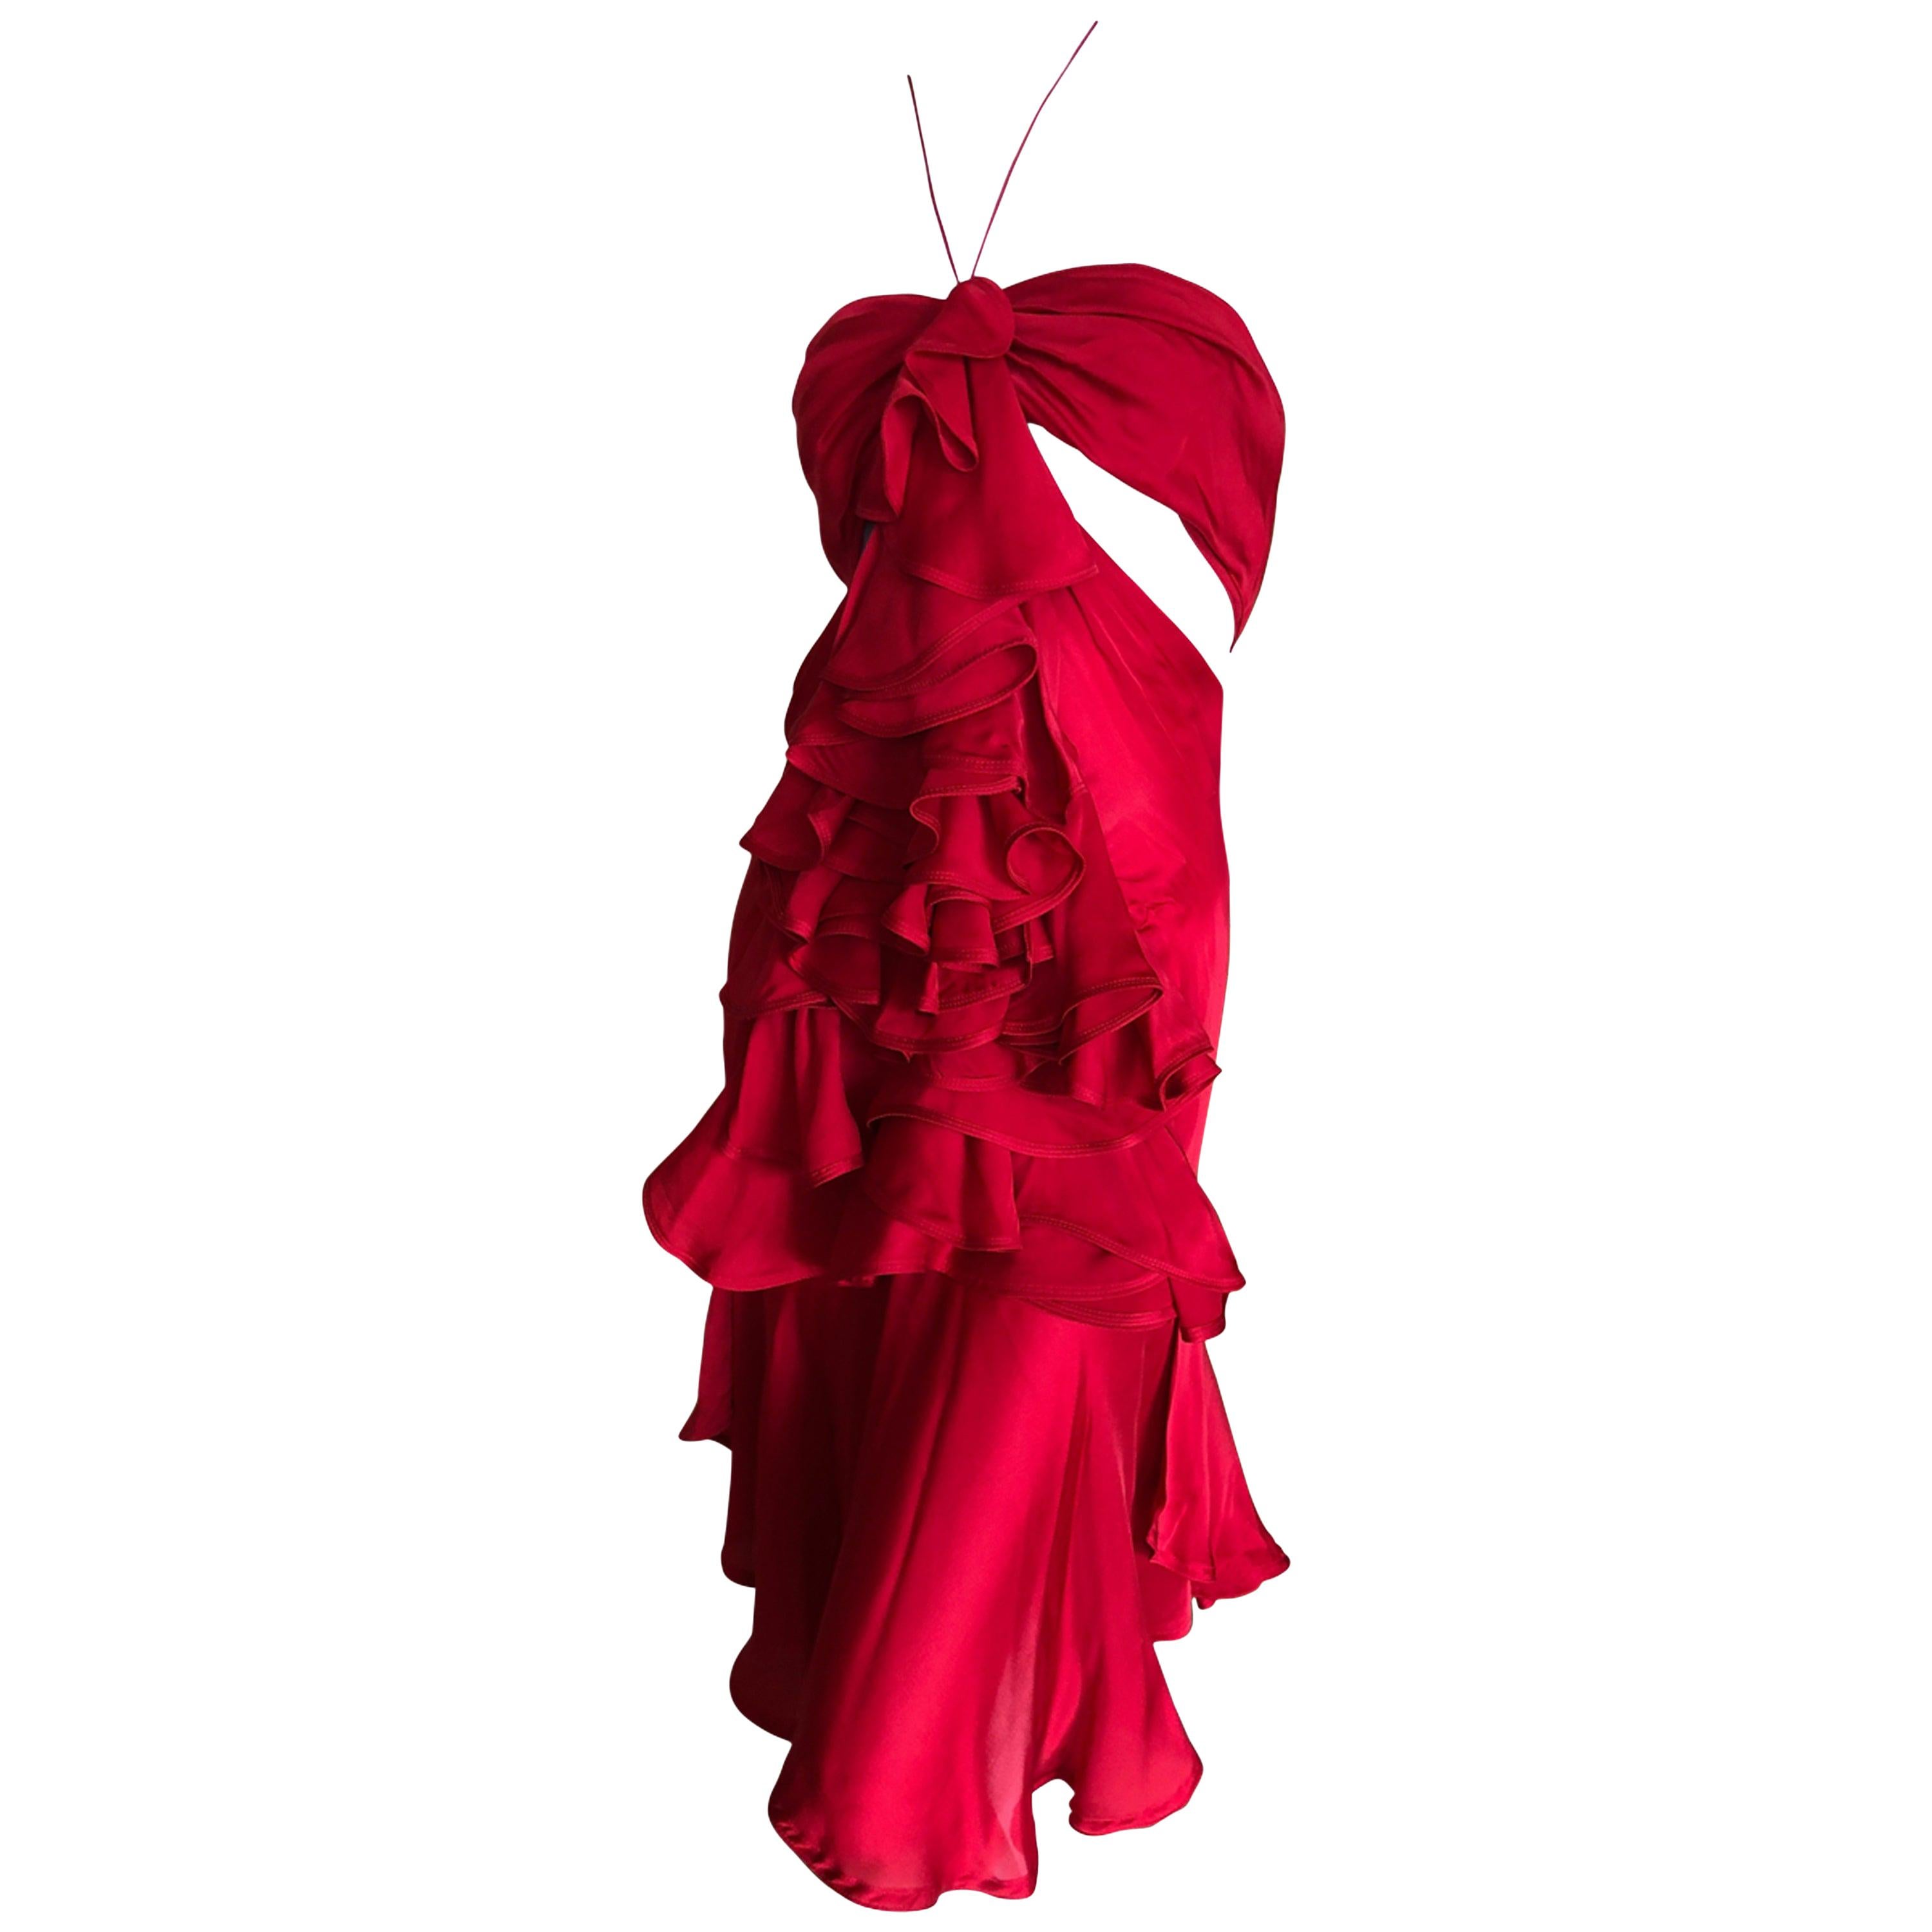 Yves Saint Laurent by Tom Ford 2003 Ruffled Red Silk Dress  For Sale